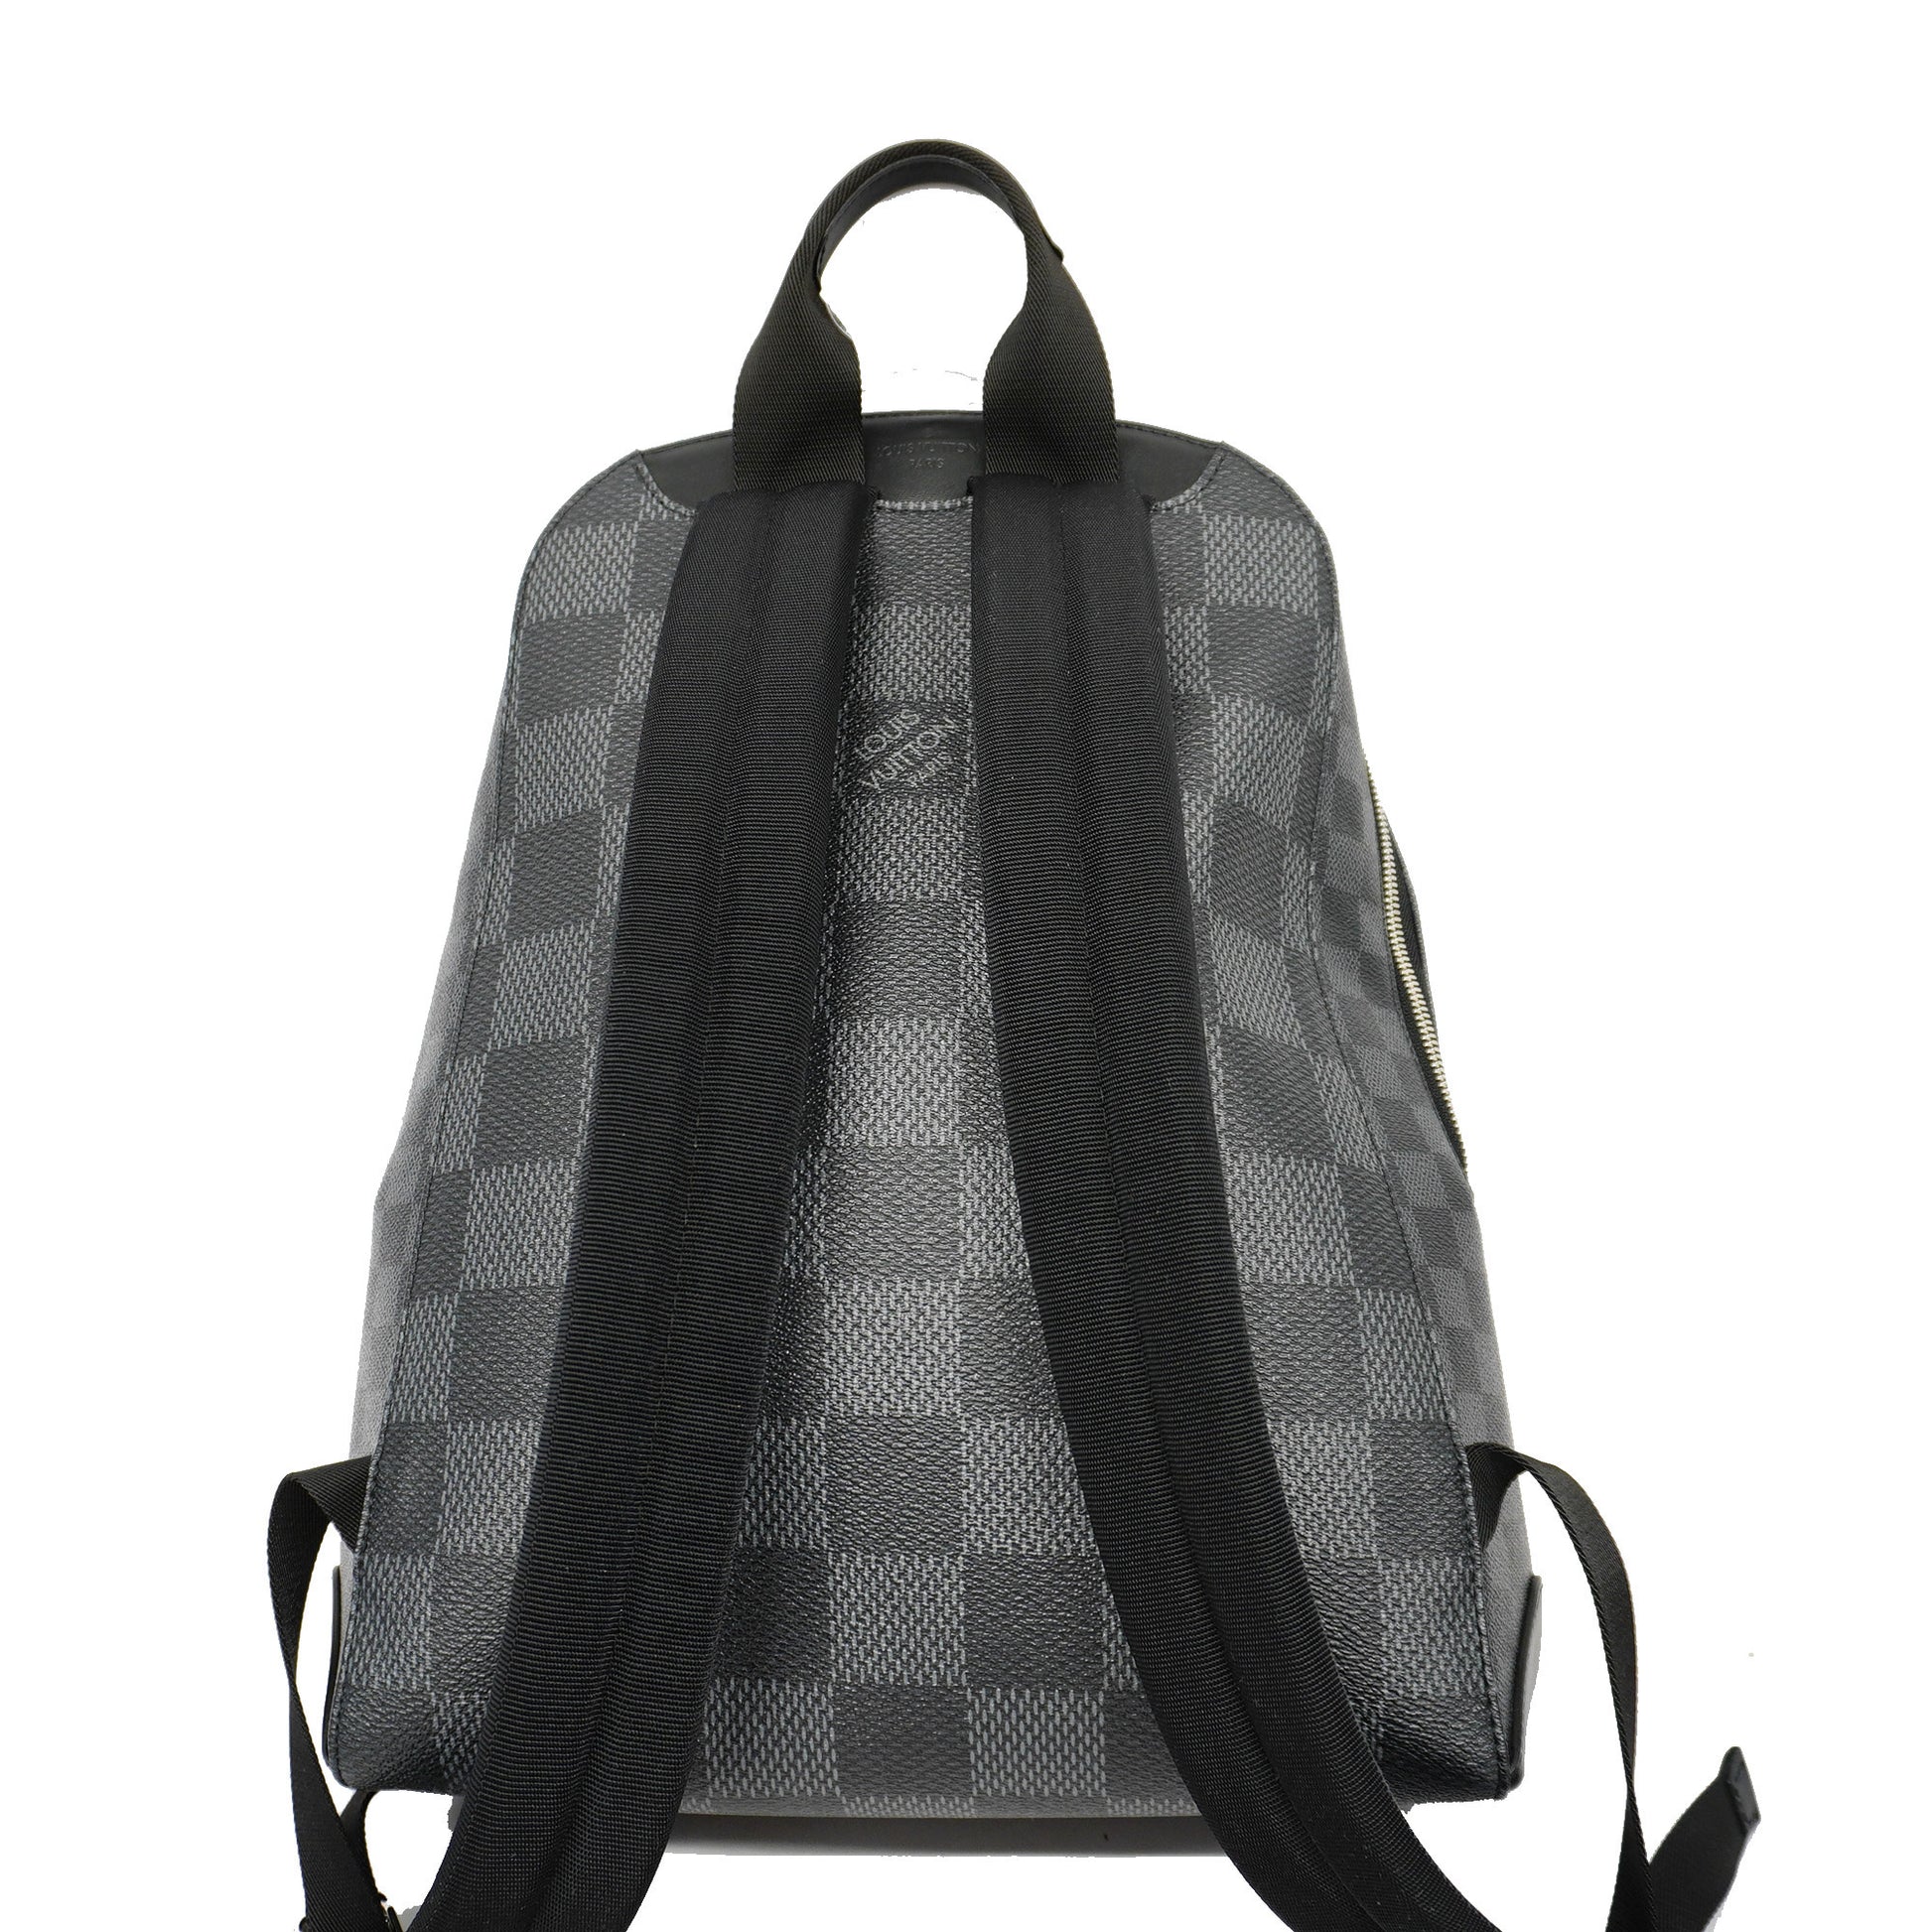 Shop Louis Vuitton DAMIER Campus backpack (N50009) by ☆MIMOSA☆